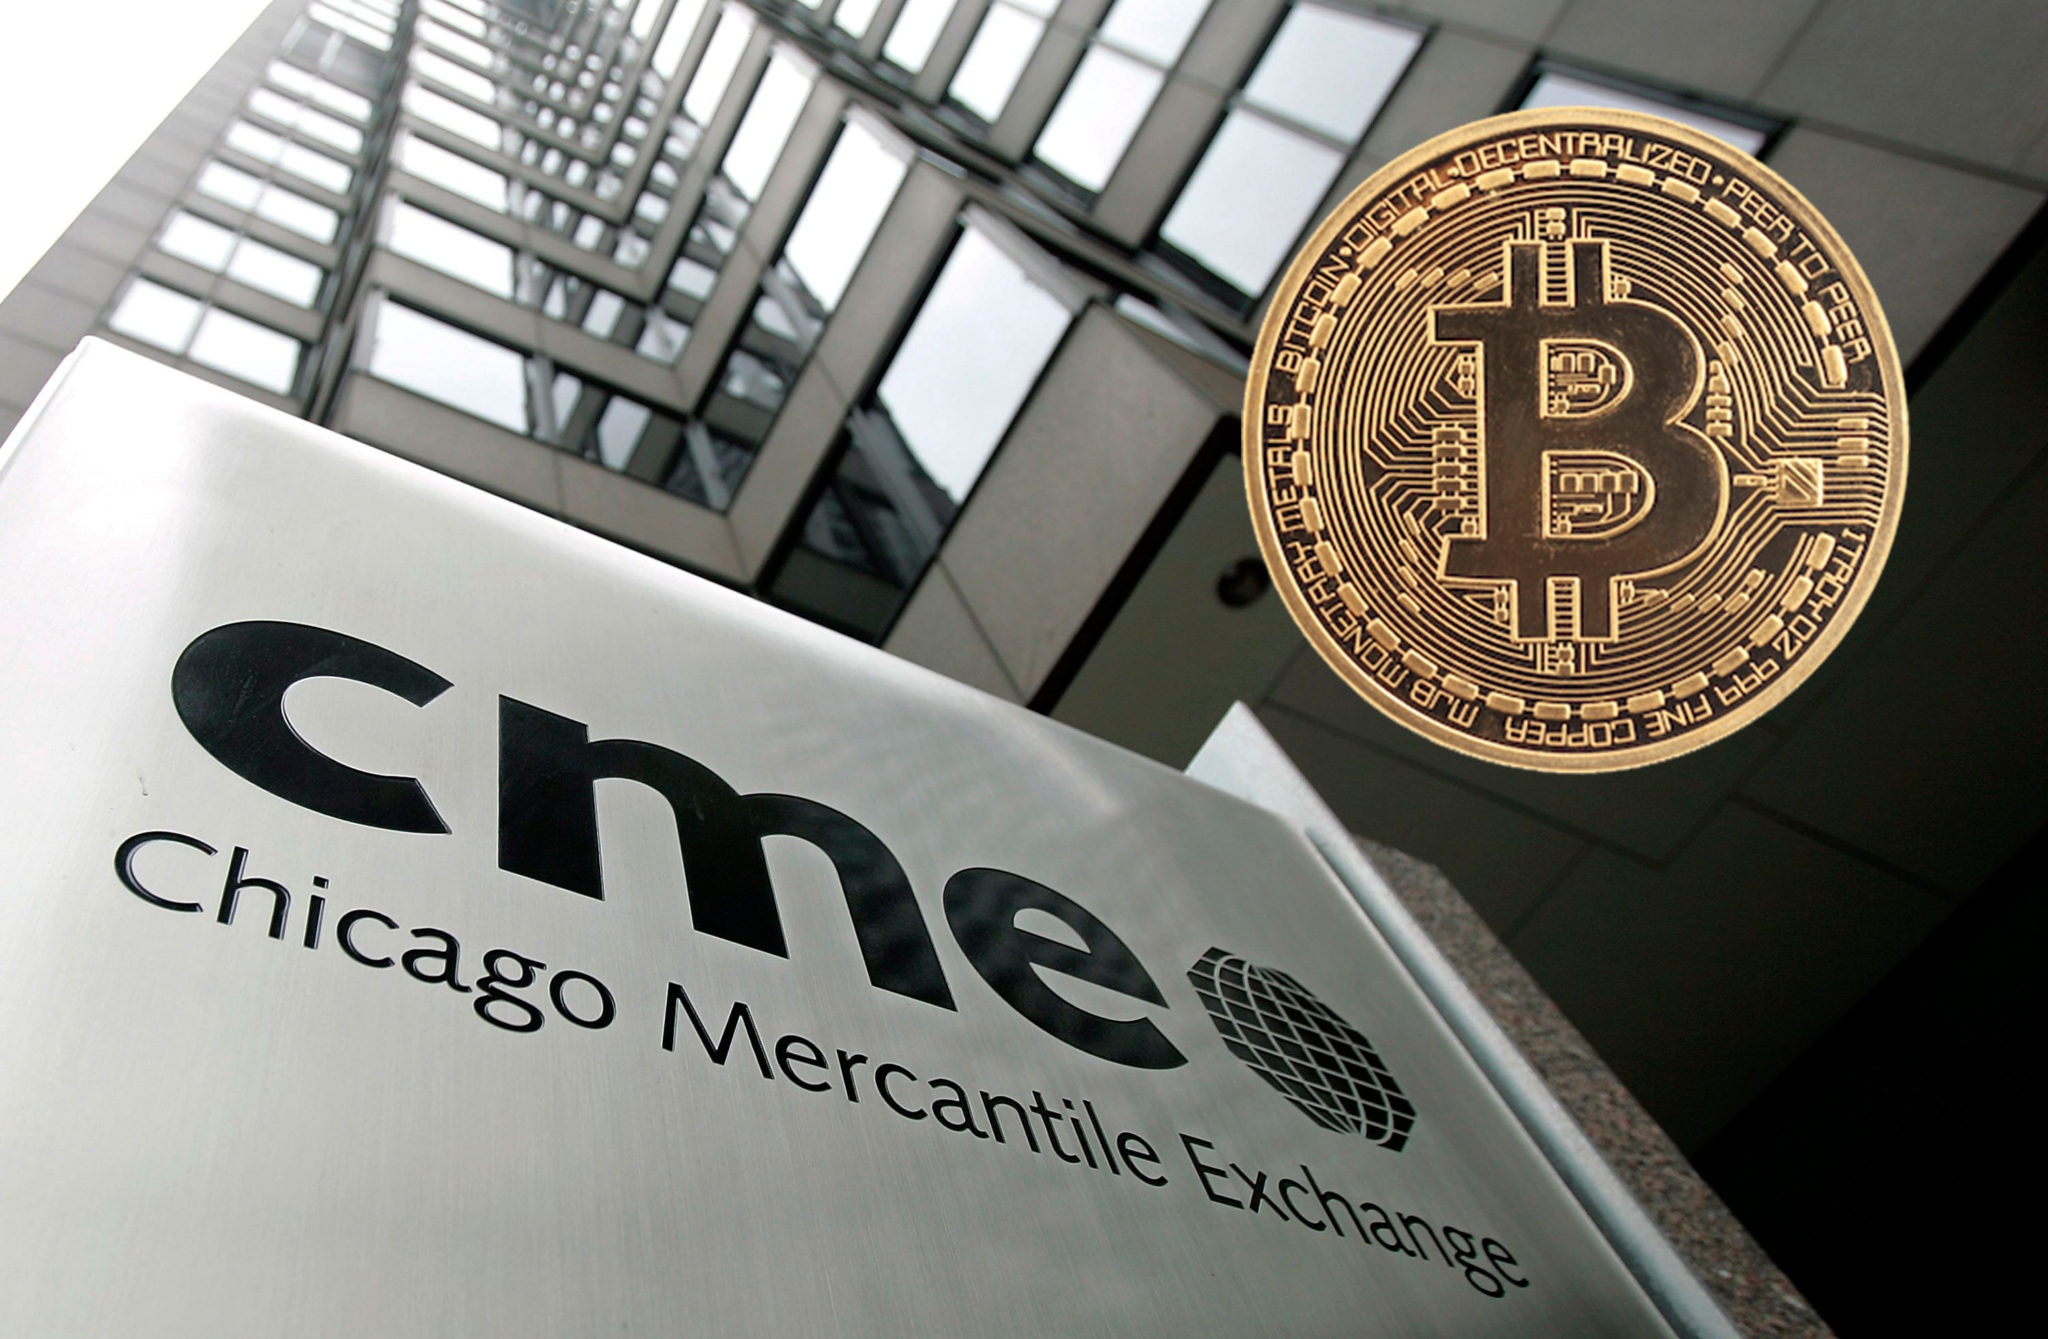 Bitcoin [BTC] – CME Group to Launch Bitcoin Futures Options in Q1 2020